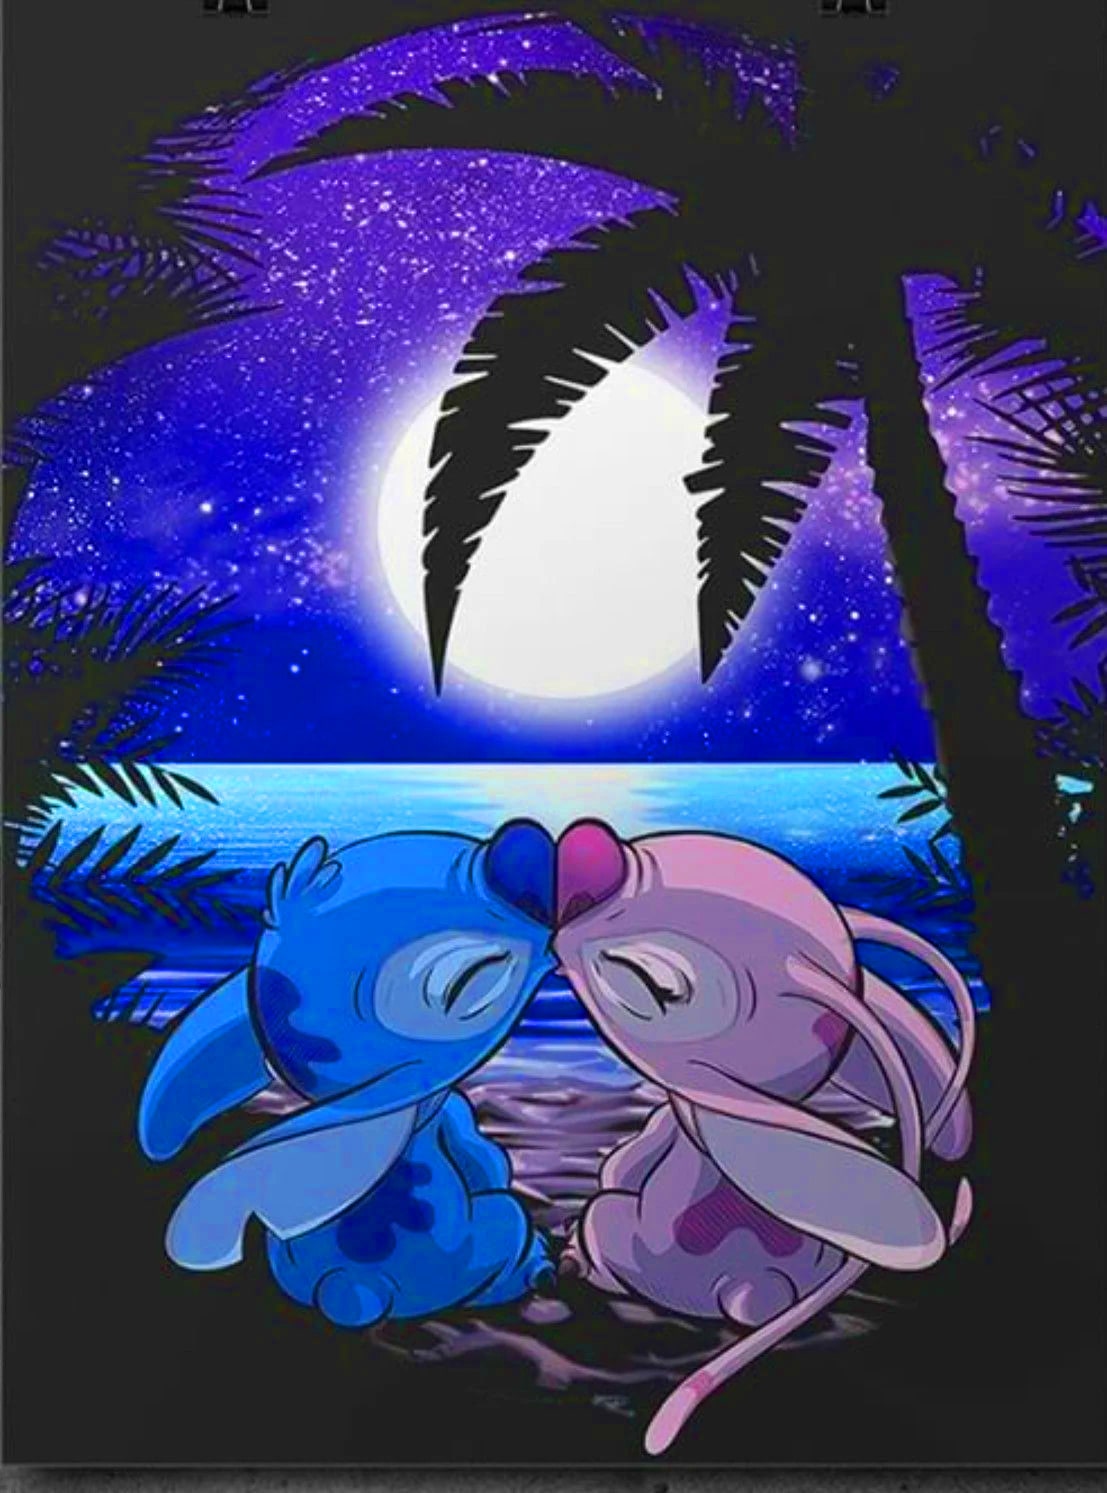 50 Adorable Stitch Wallpapers  Glittery Cloud  Idea Wallpapers  iPhone  WallpapersColor Schemes